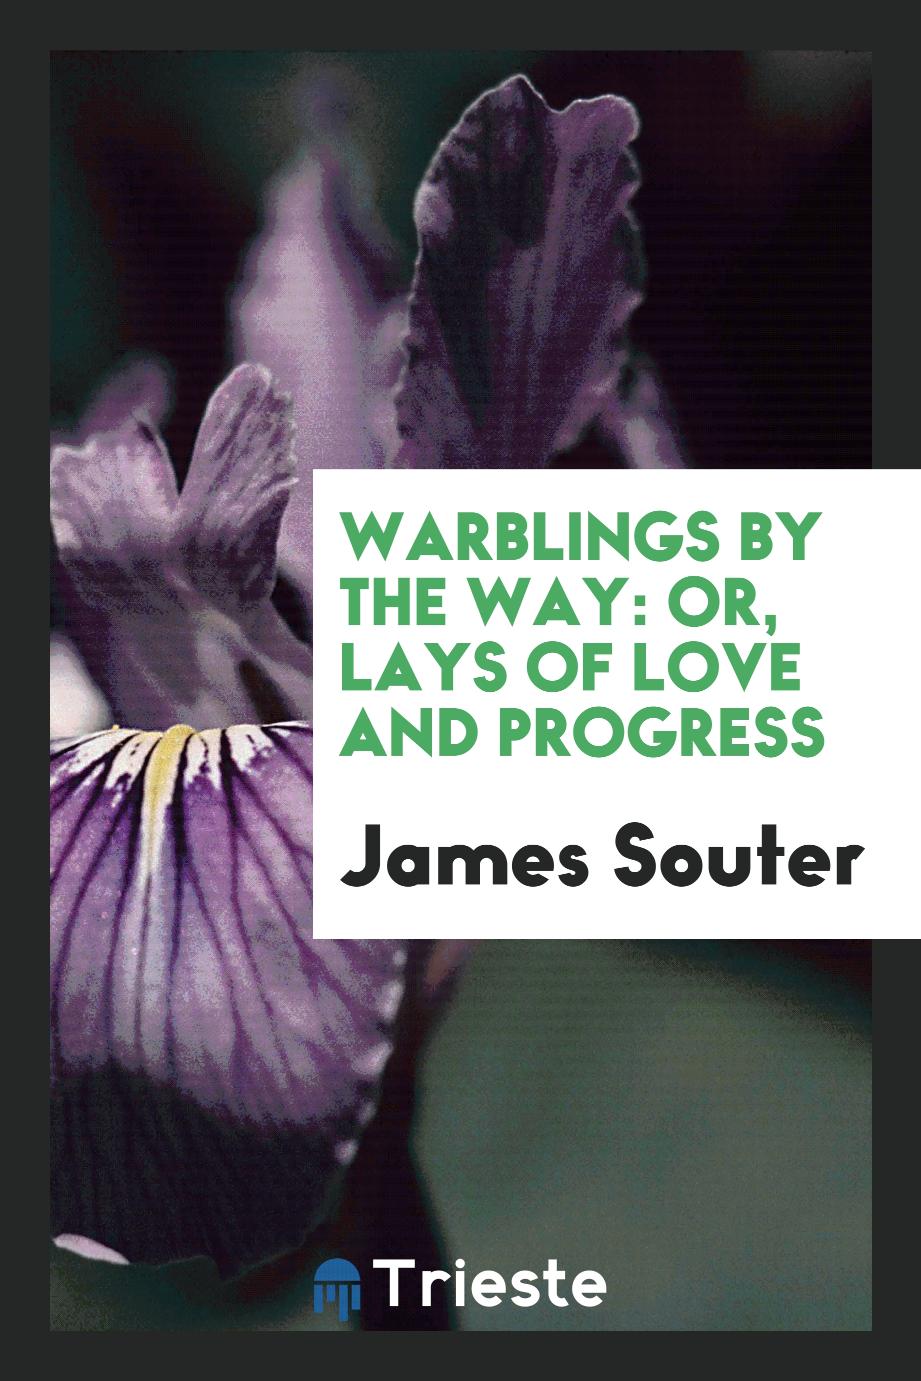 Warblings by the Way: Or, Lays of Love and Progress